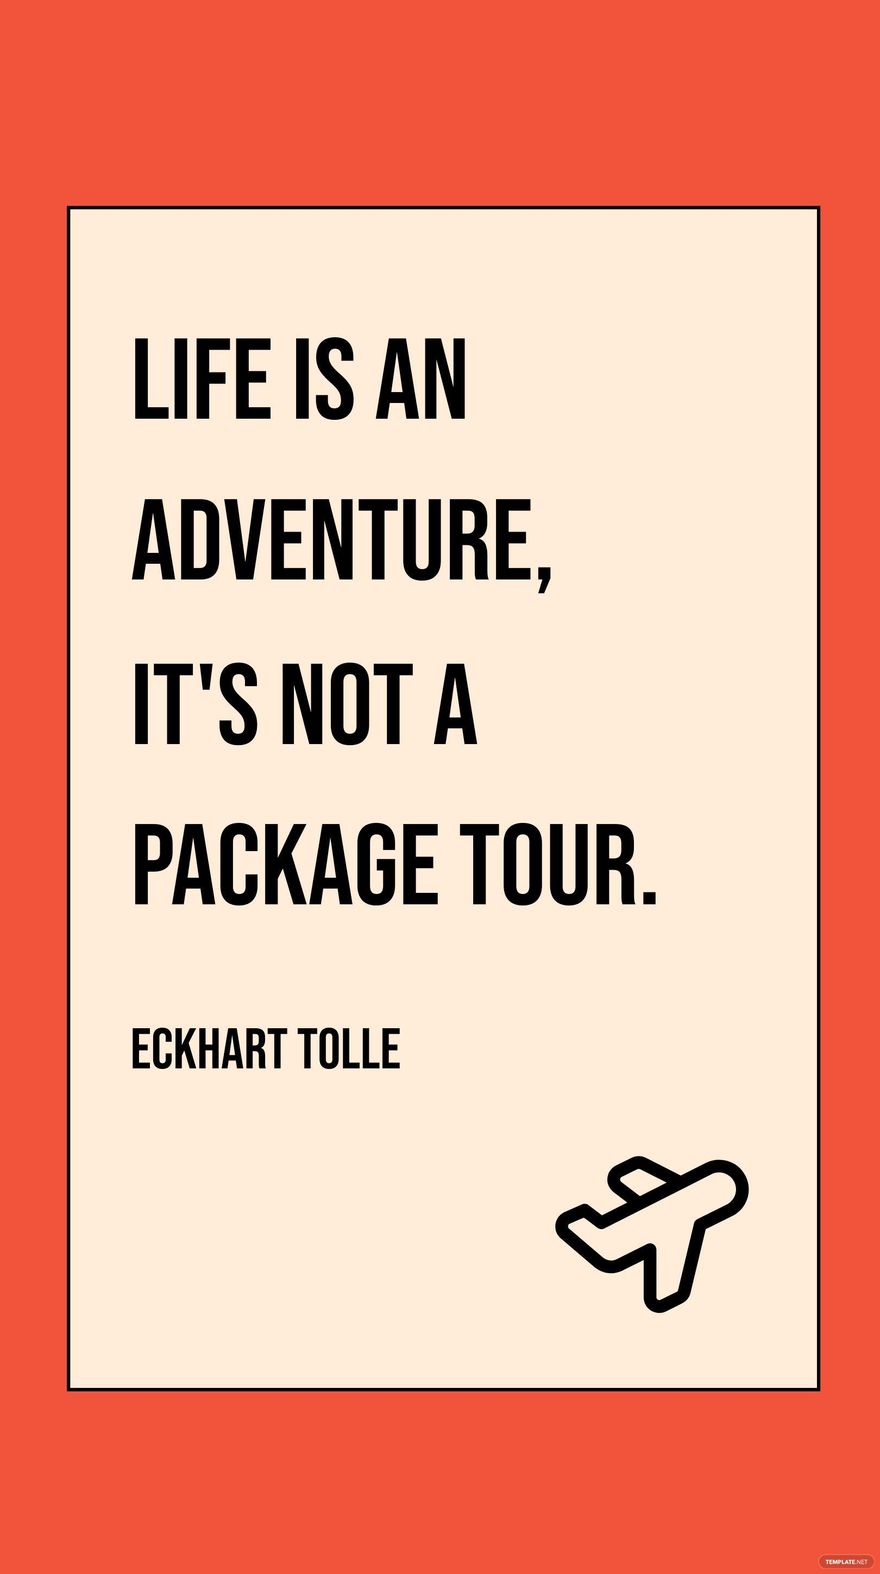 Eckhart Tolle -Life is an adventure, it's not a package tour.